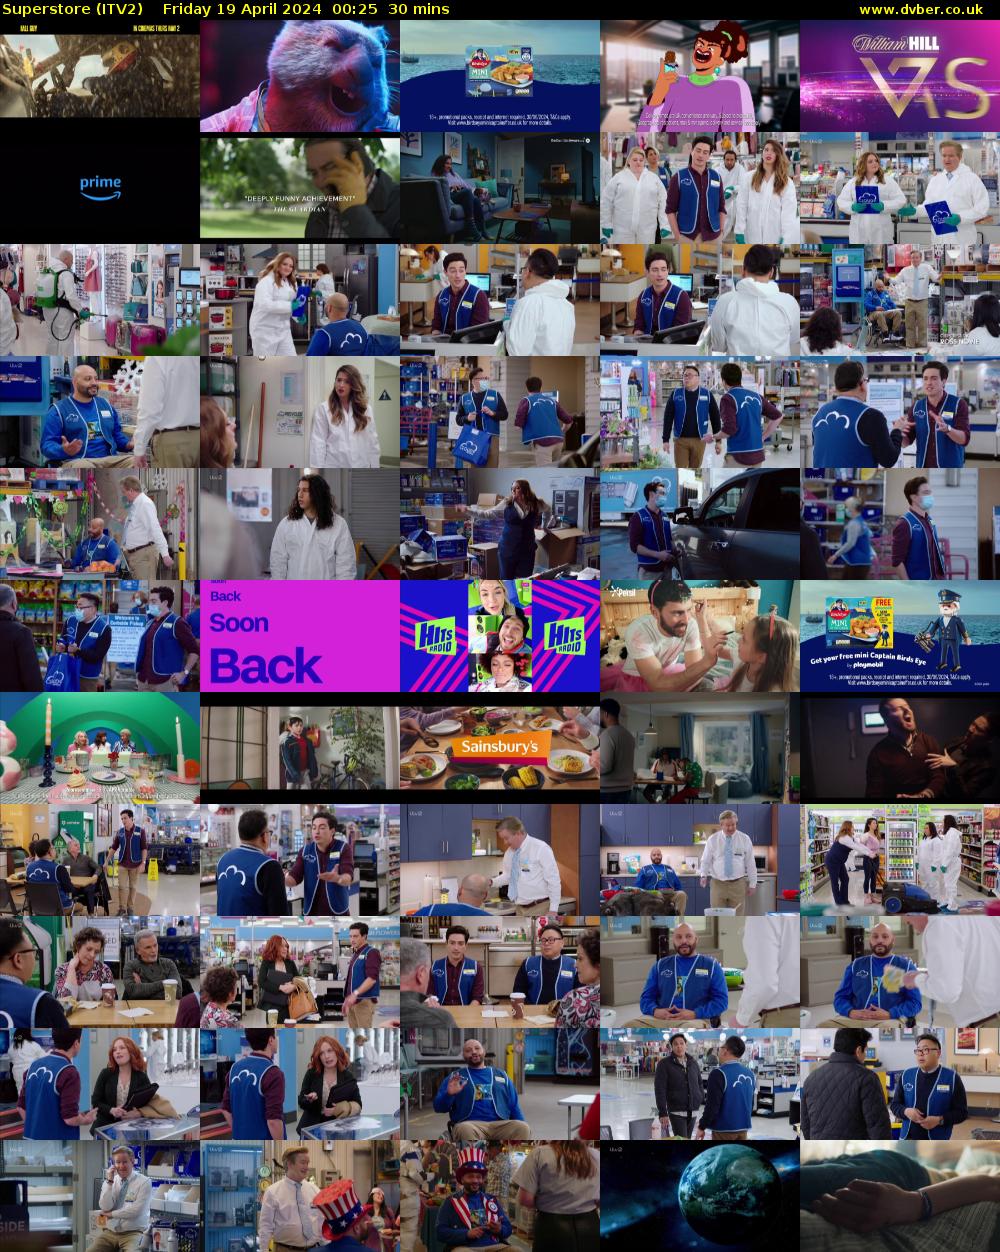 Superstore (ITV2) Friday 19 April 2024 00:25 - 00:55